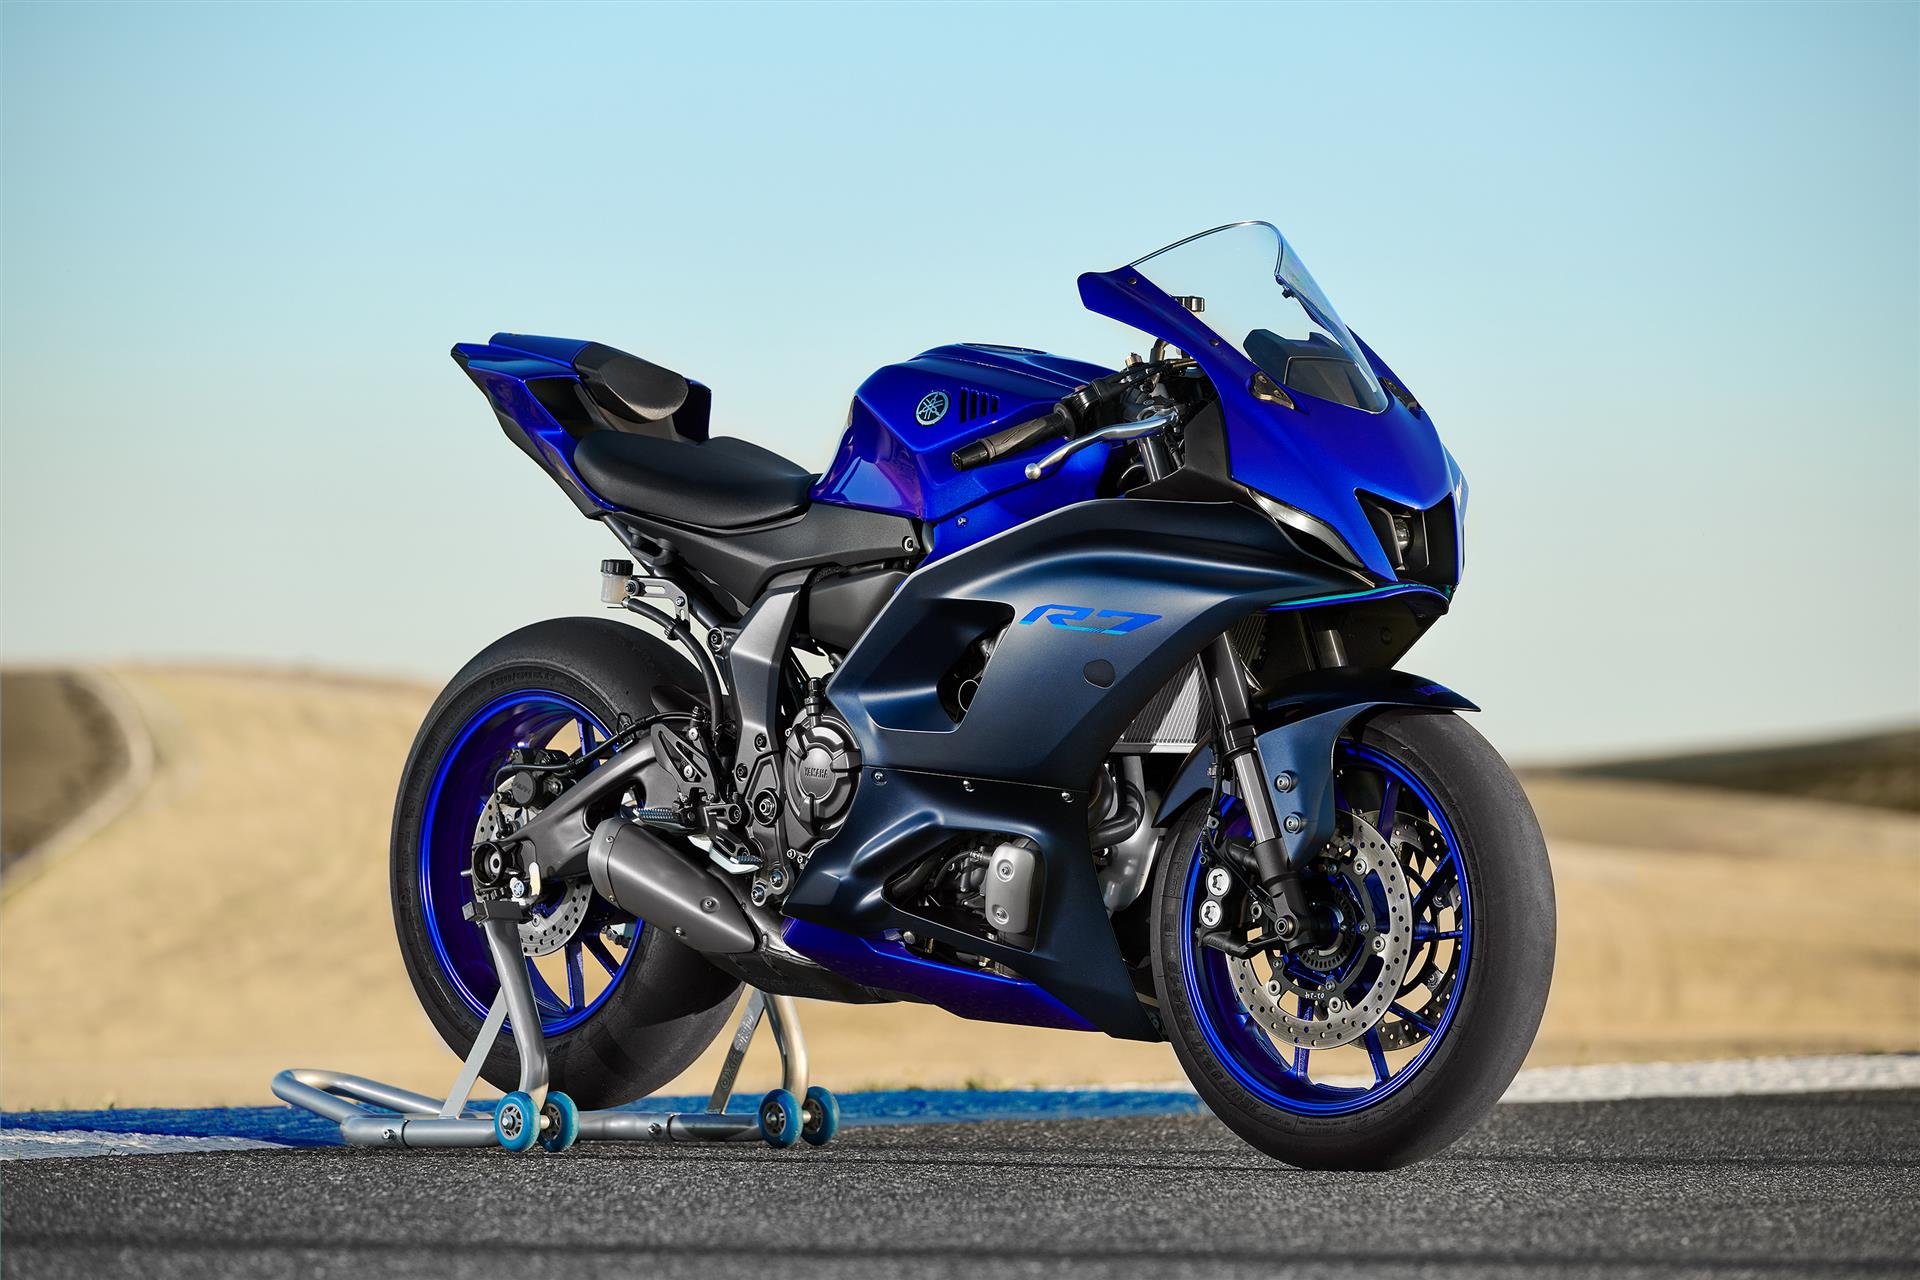 Yamaha Releases the All-New 2022 YZF-R7 - webBikeWorld